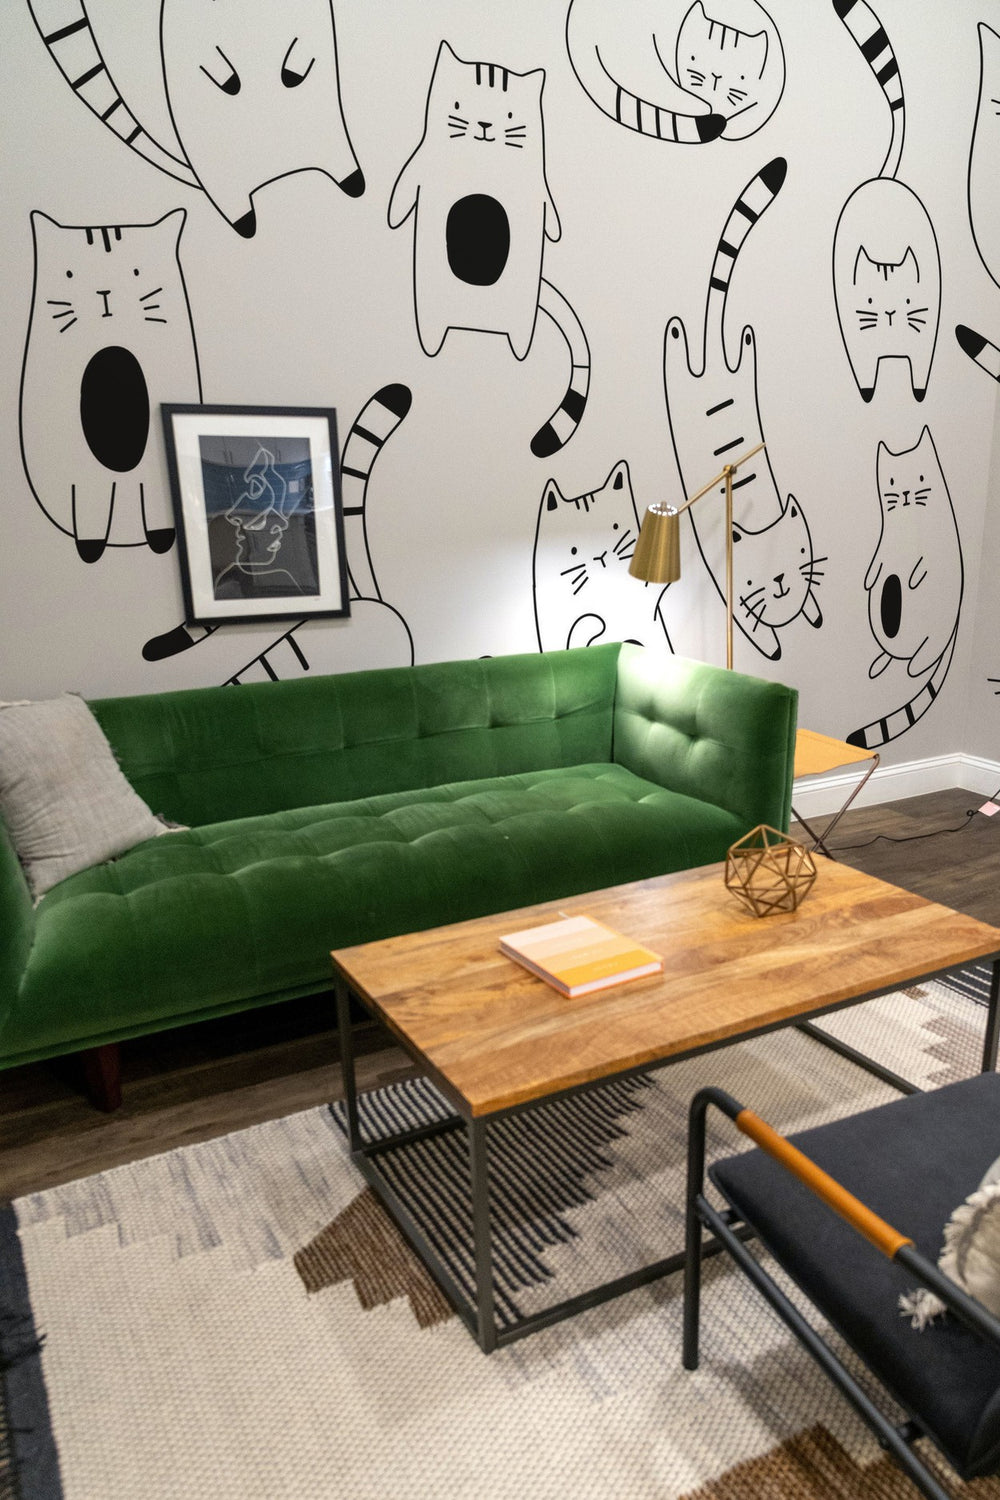 A contemporary living room with a green sofa, a wooden coffee table, and a whimsical cat-themed mural on the wall.